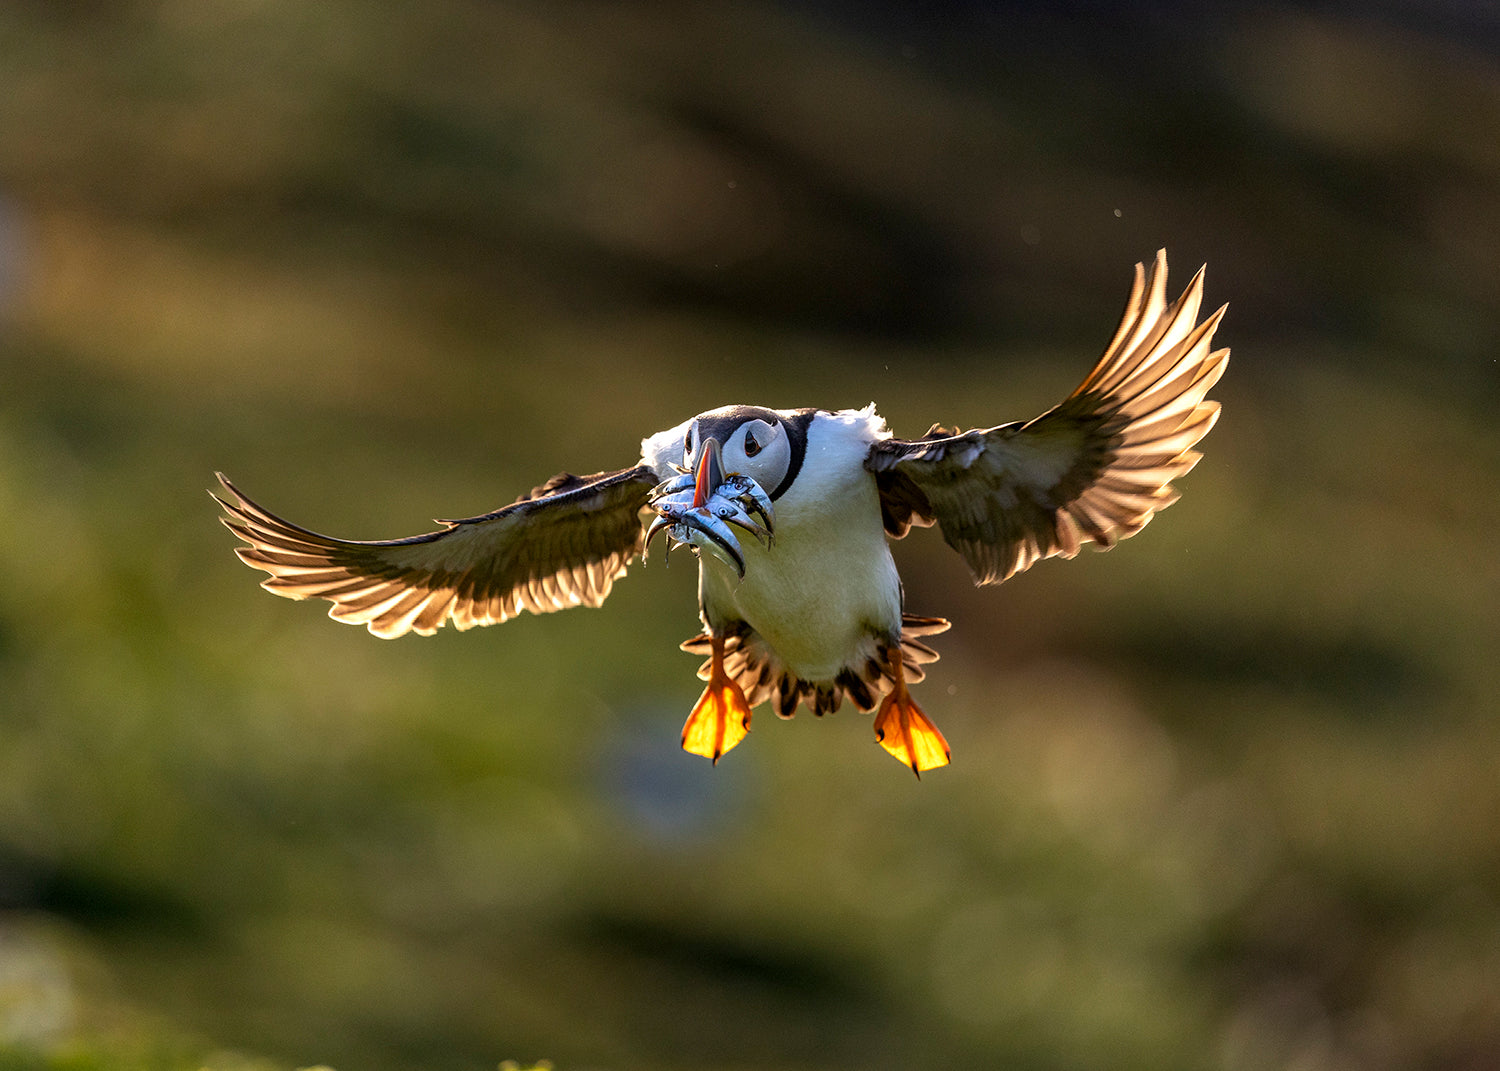 Puffin photographed mid-flight